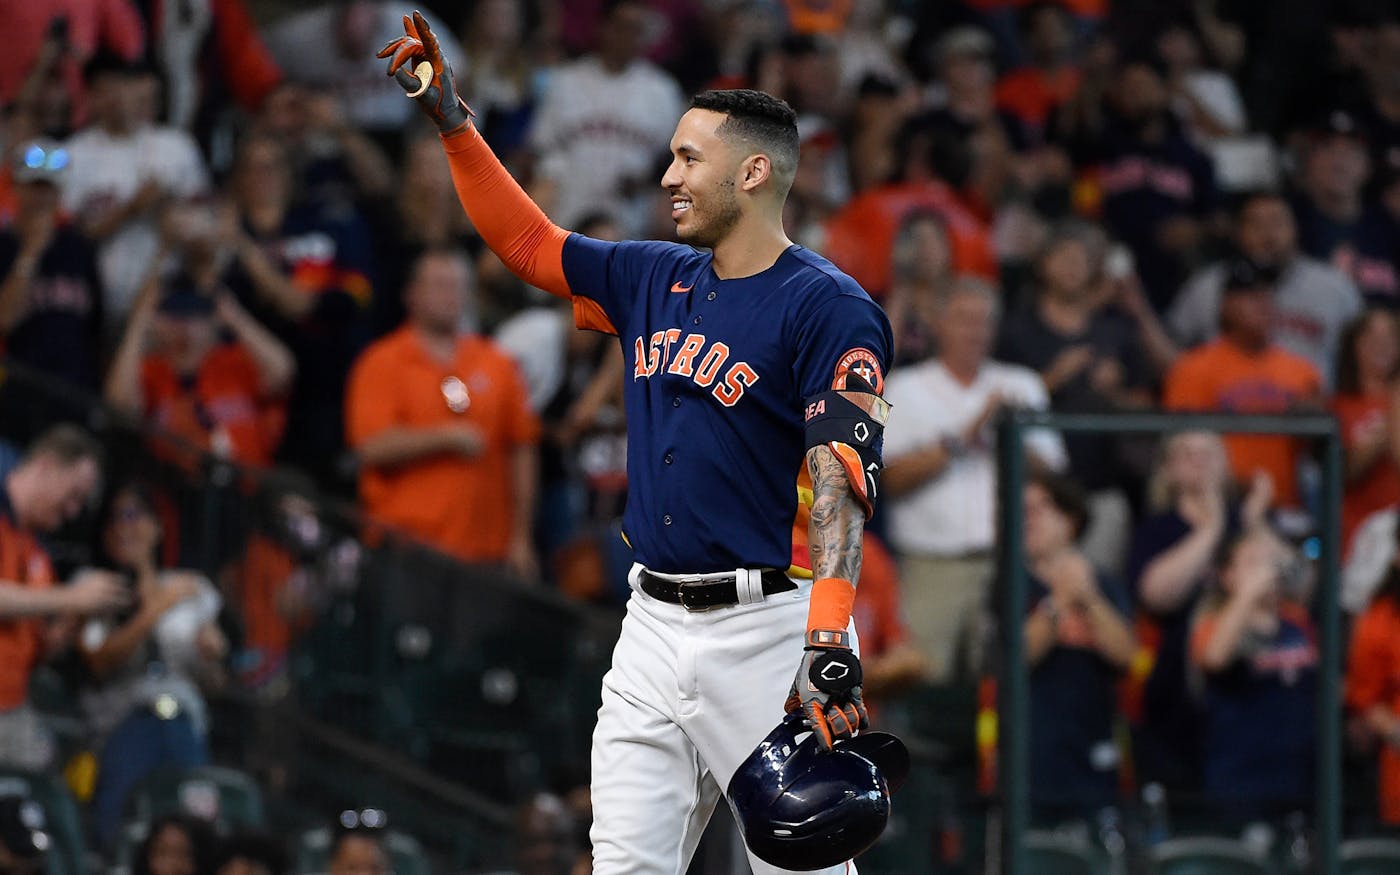 Carlos Correa opens up on uncertain future after Astros' World